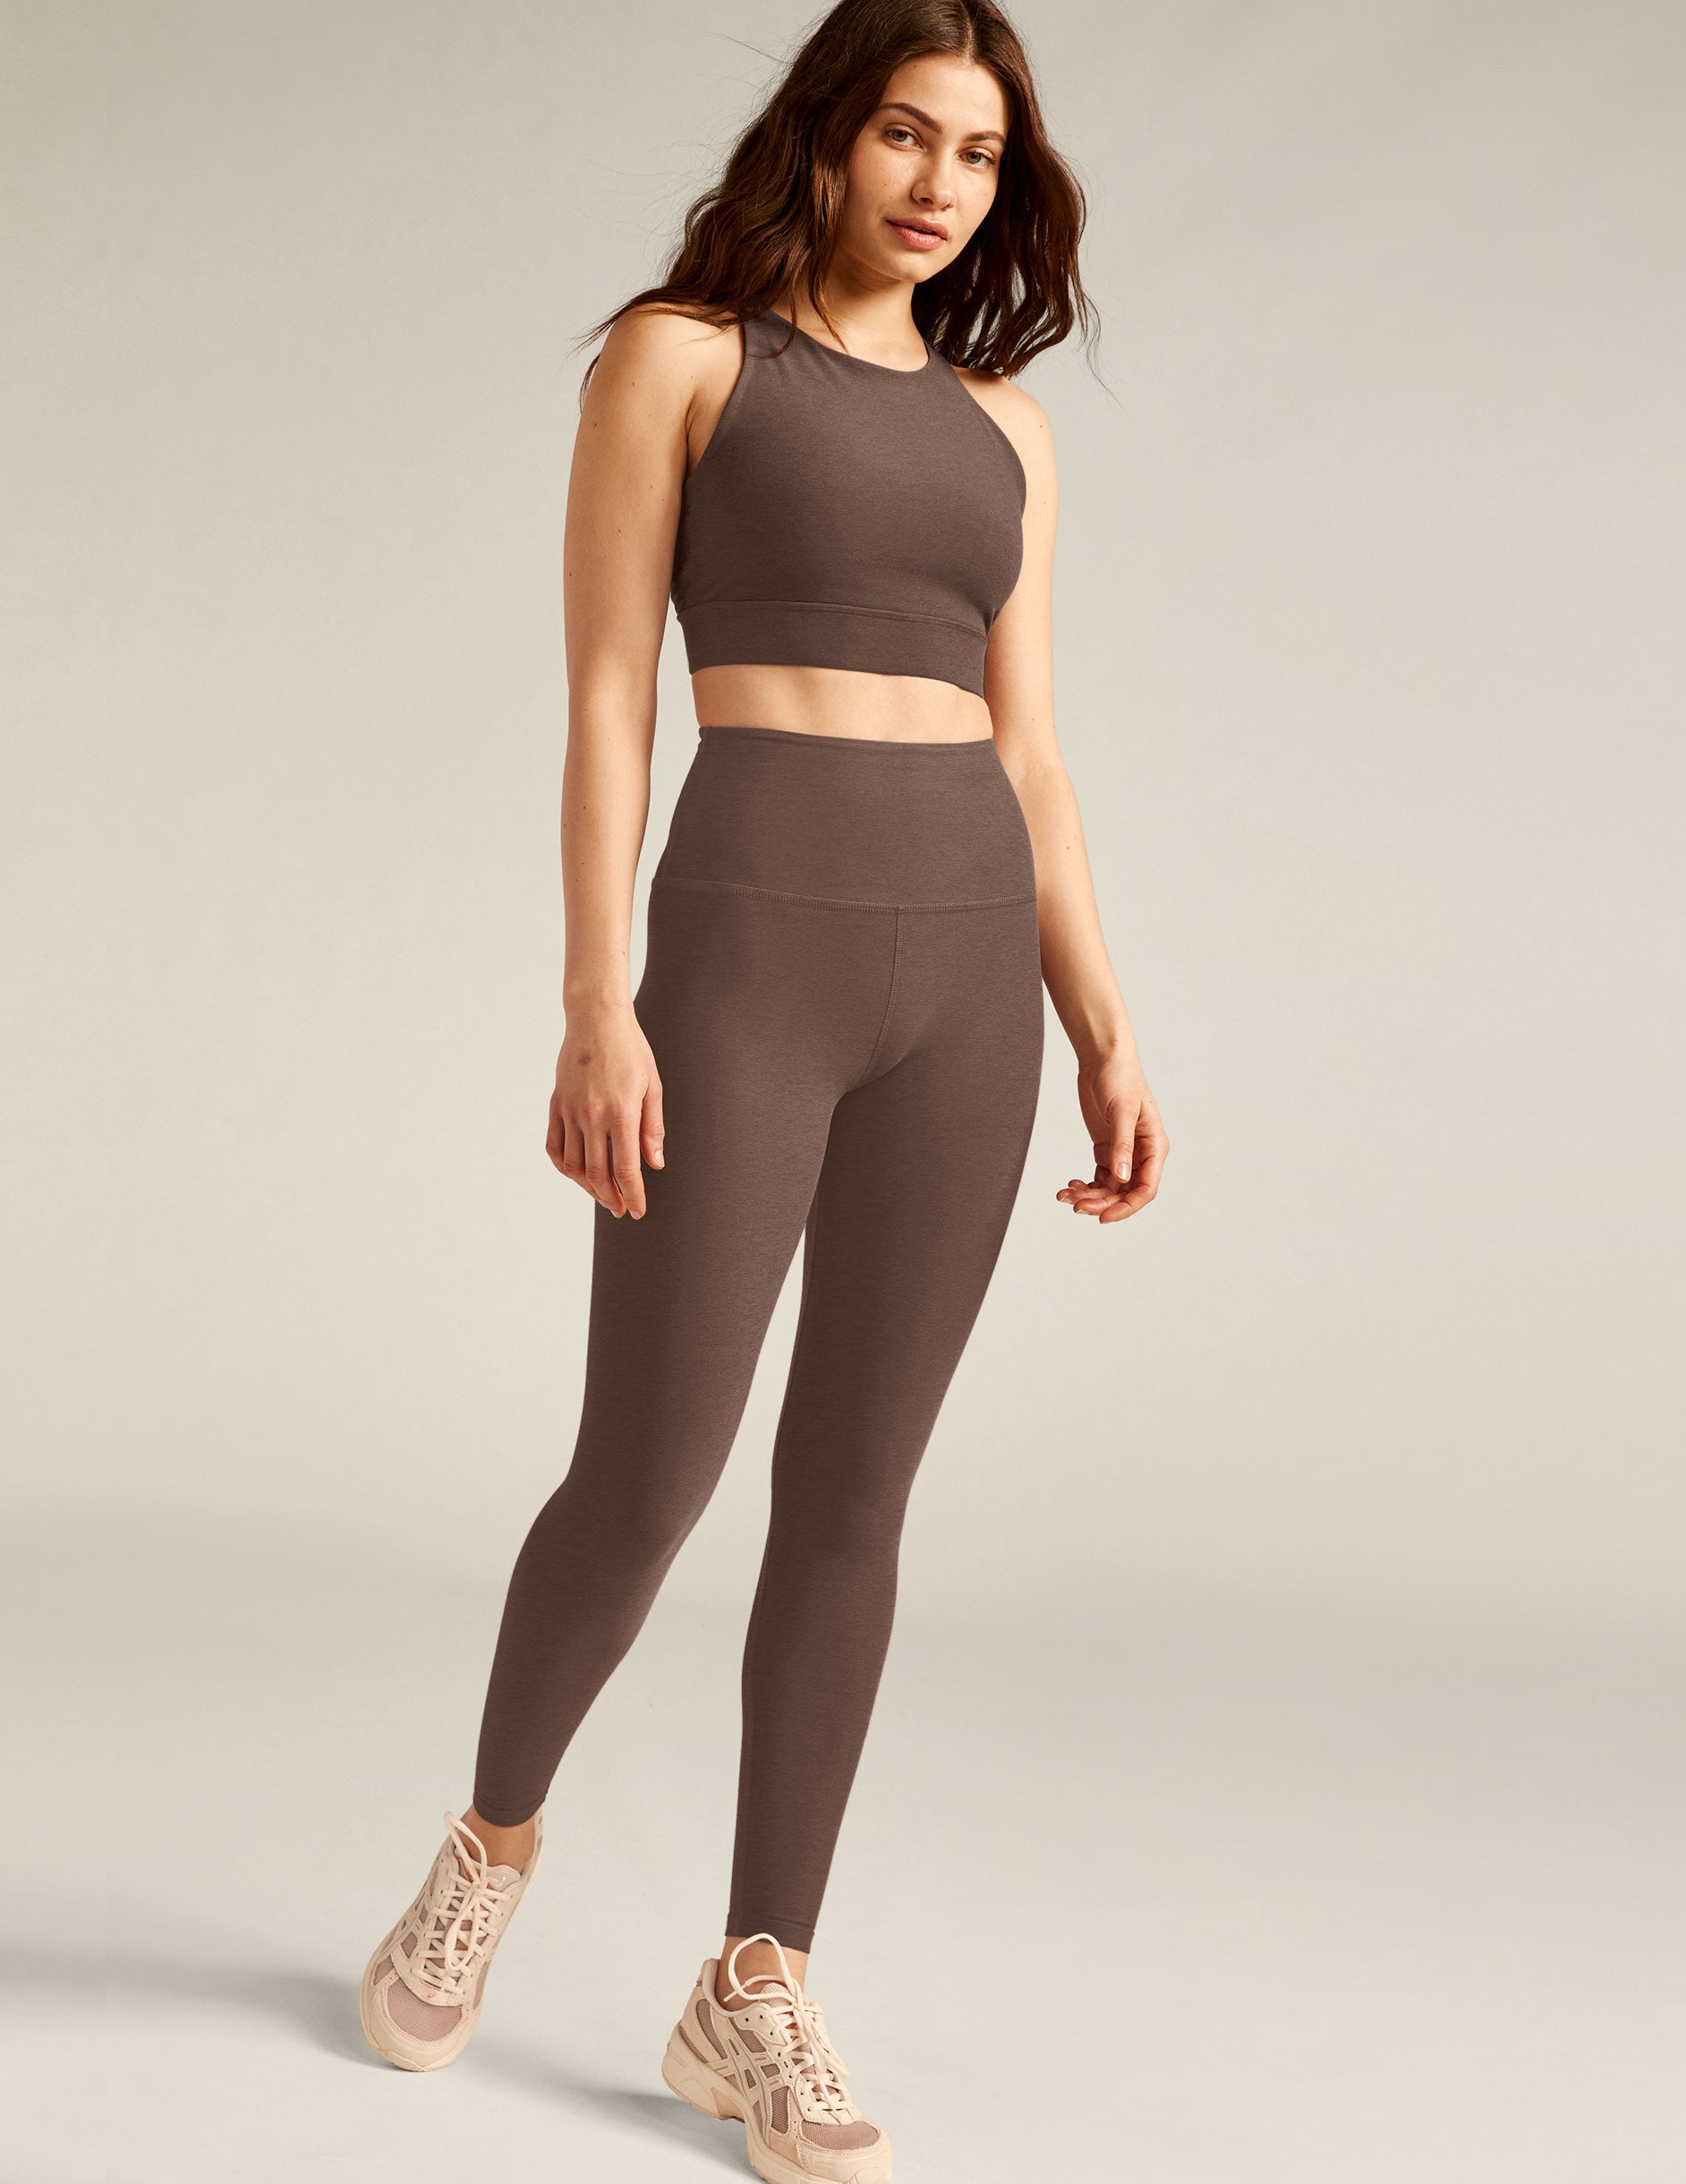 Beyond Yoga Work It Over Longline Bra  Anthropologie Japan - Women's  Clothing, Accessories & Home